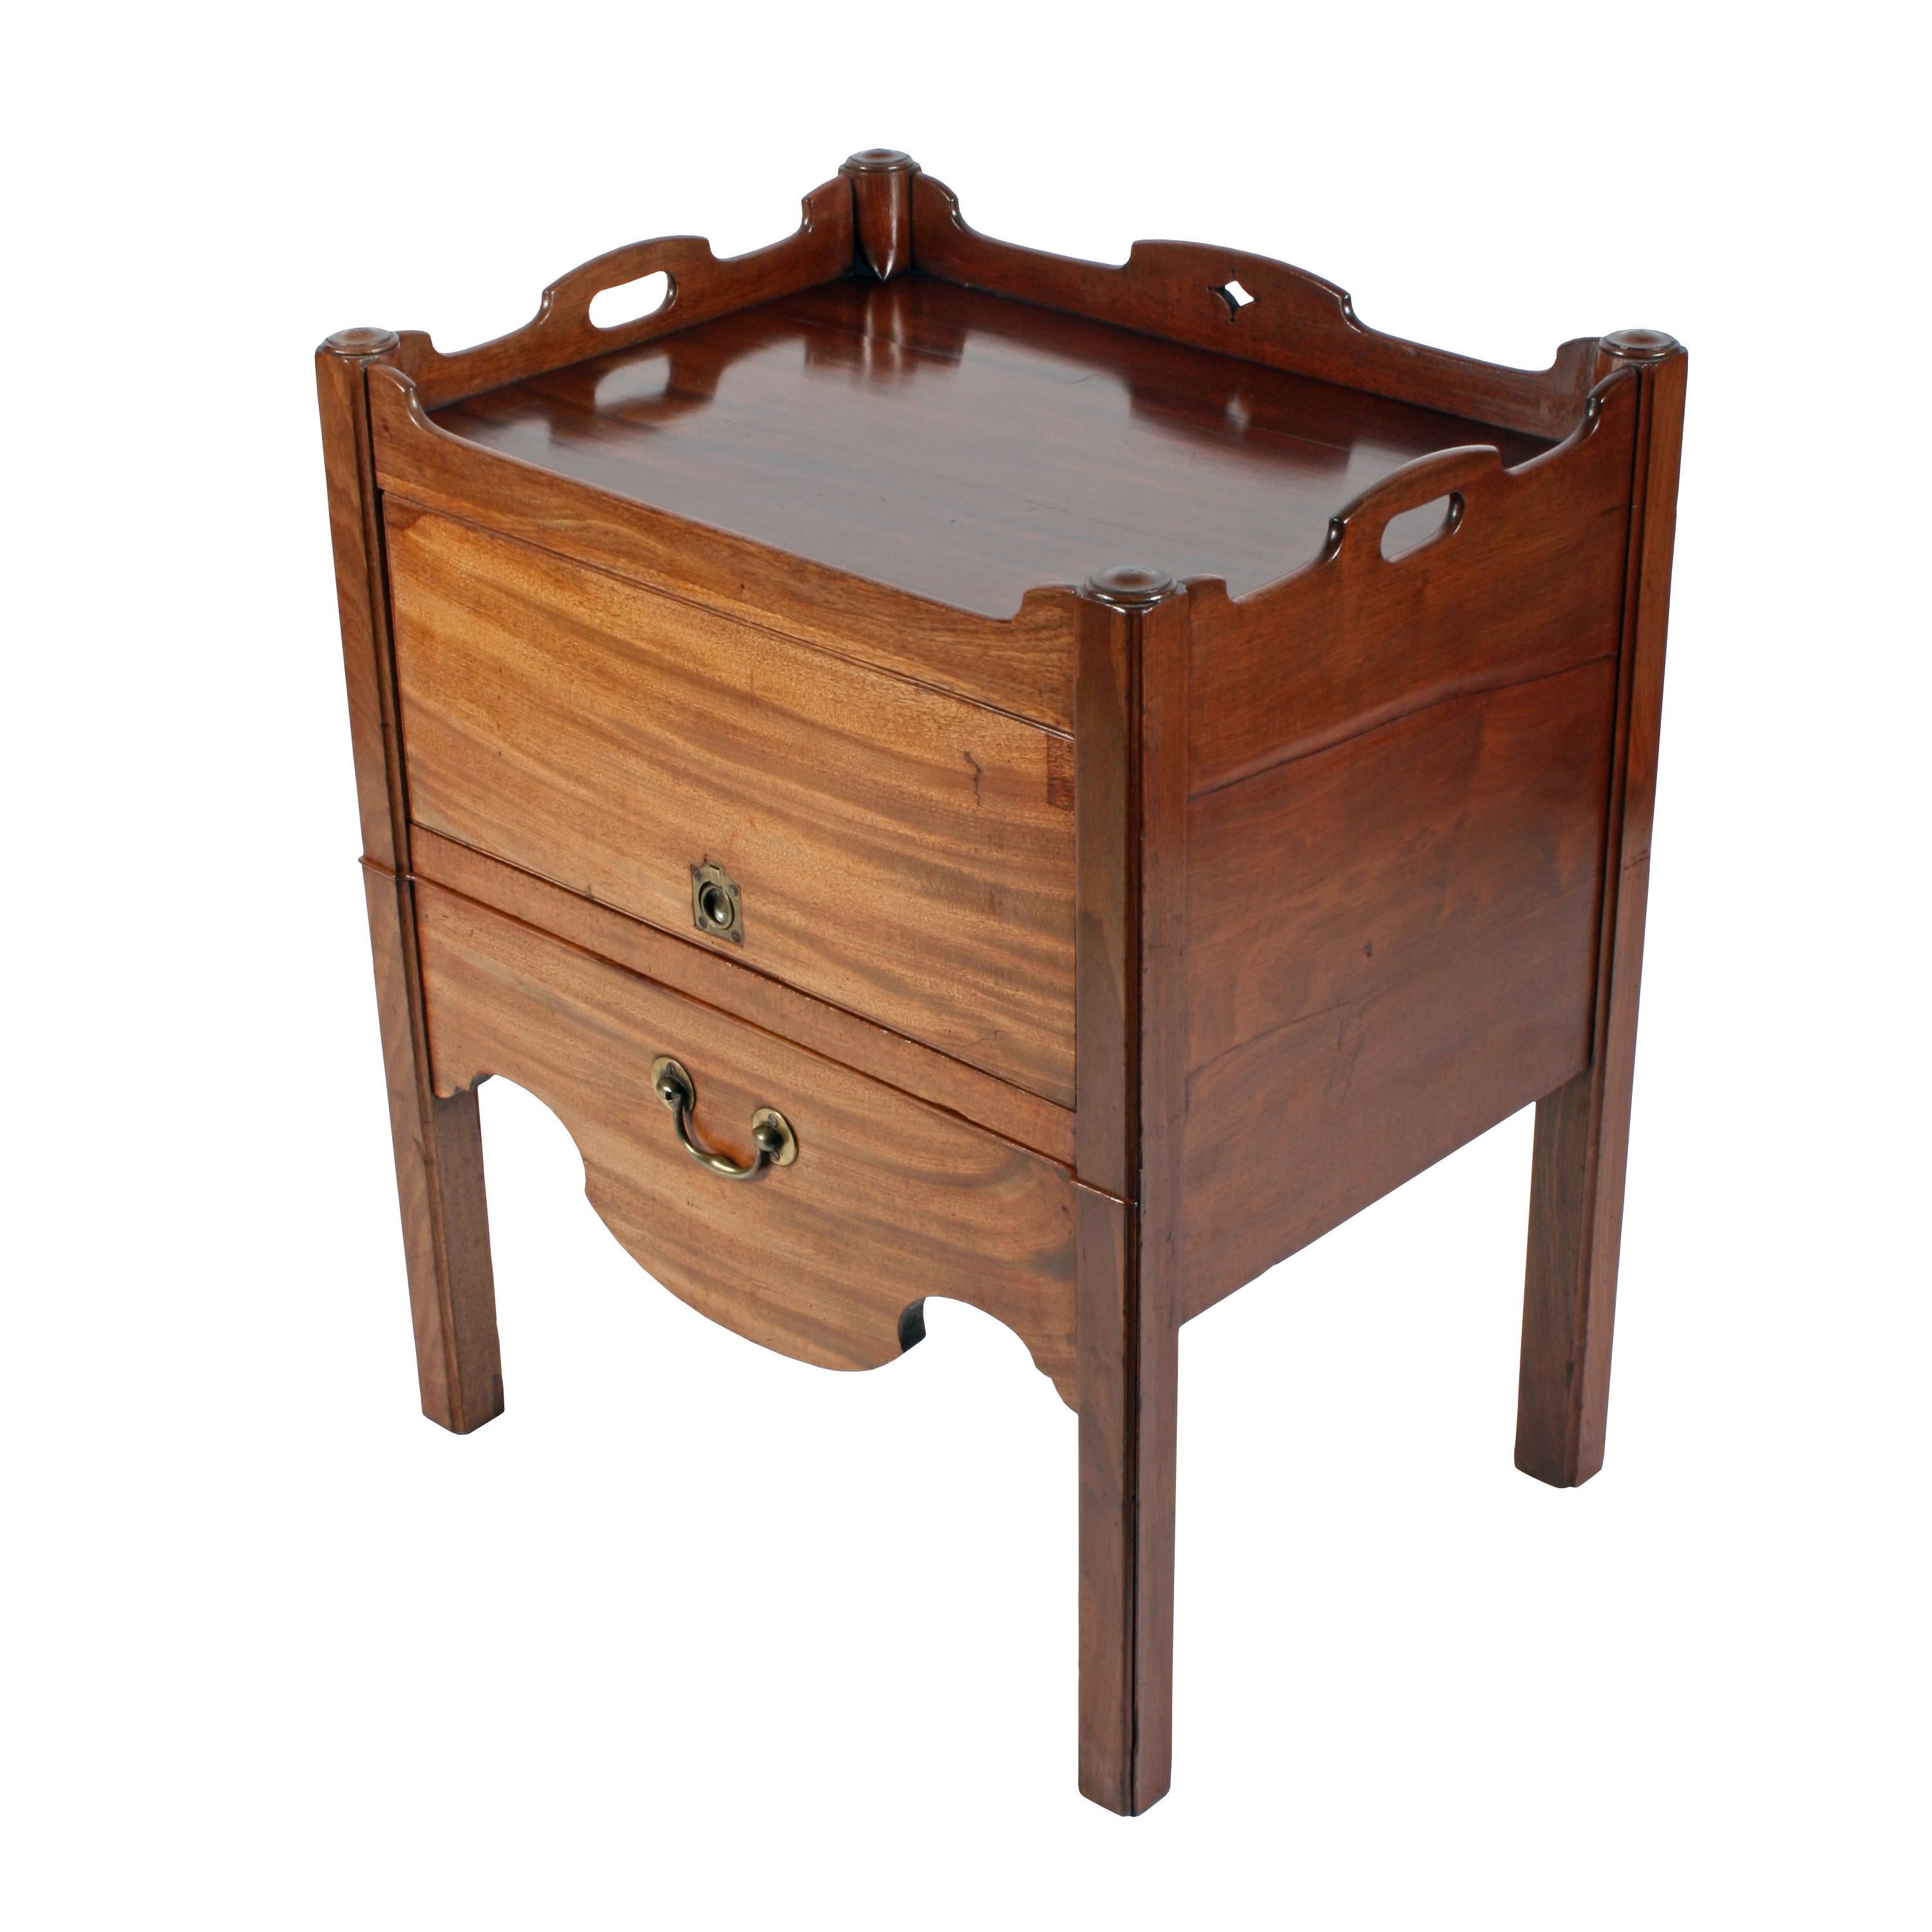 An 18th century Georgian mahogany tray top converted bedside commode.

The commode stands on four square legs with a chamfered edge, has an up and over door to the front and a slide out tray.

The door has a military style ring handle and the